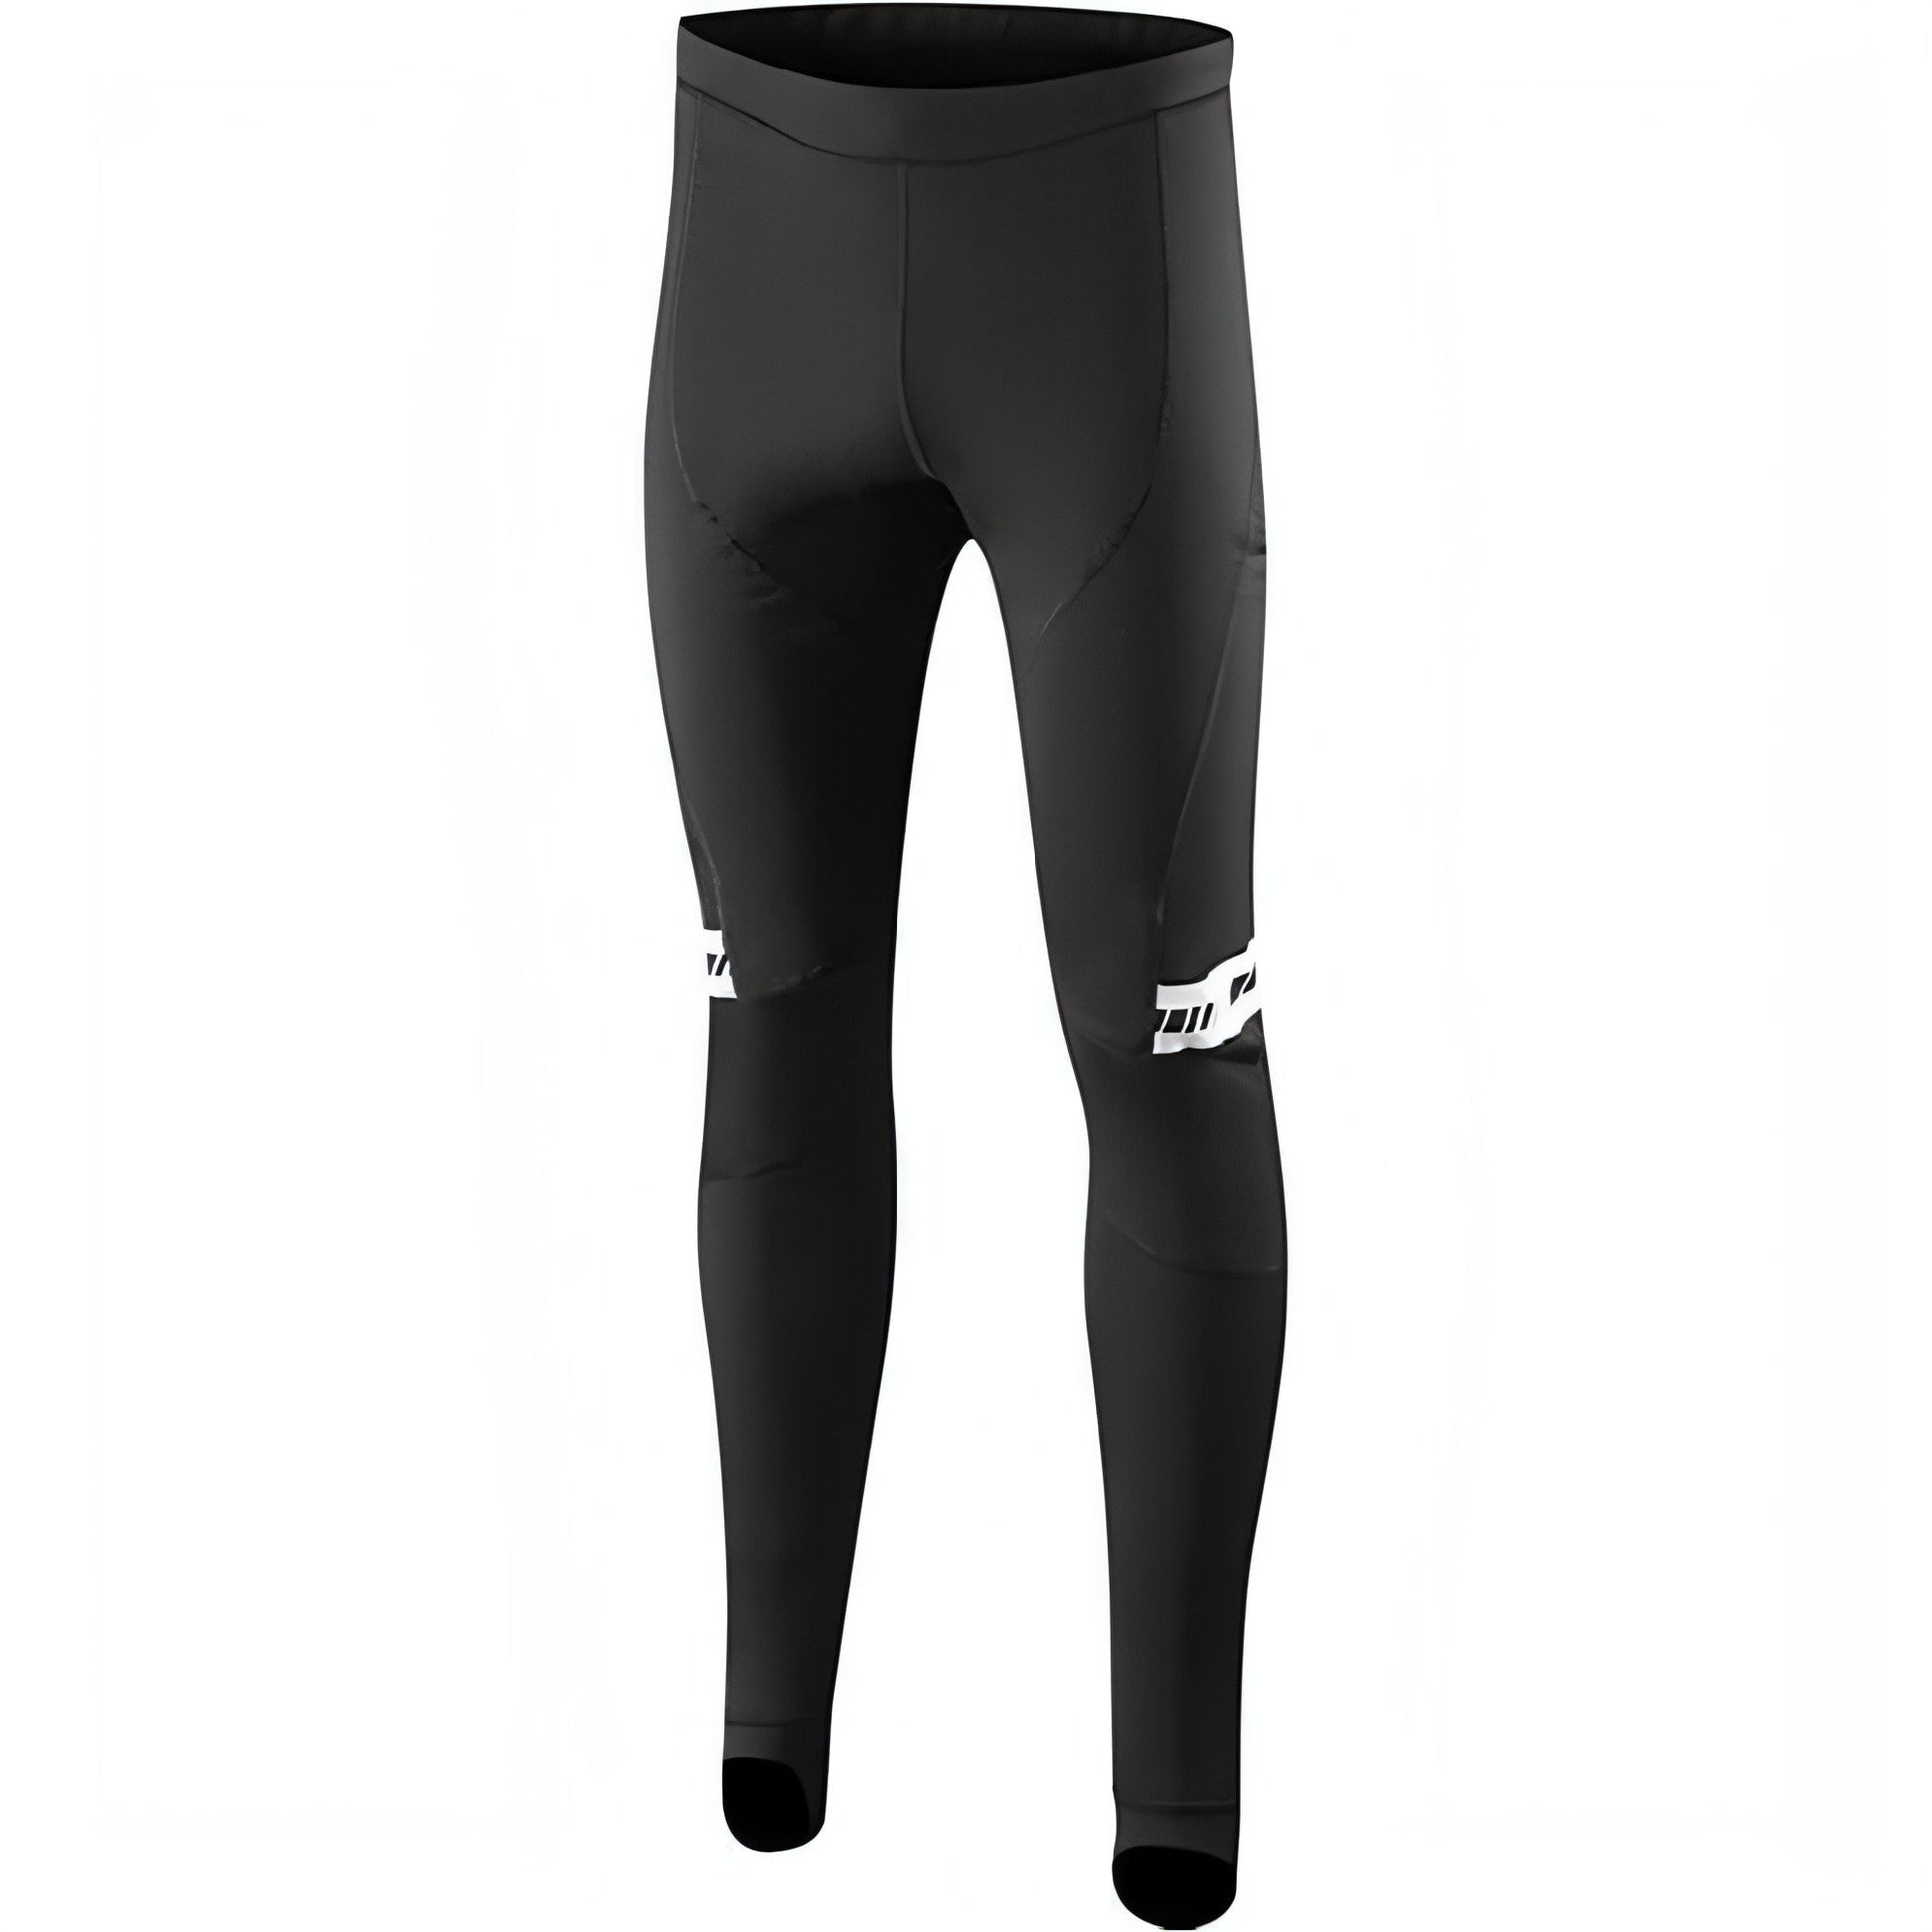 Madison Sportive Shield Softshell (Without Pad) Mens Cycling Tights - Black 5027726369506 - Start Fitness